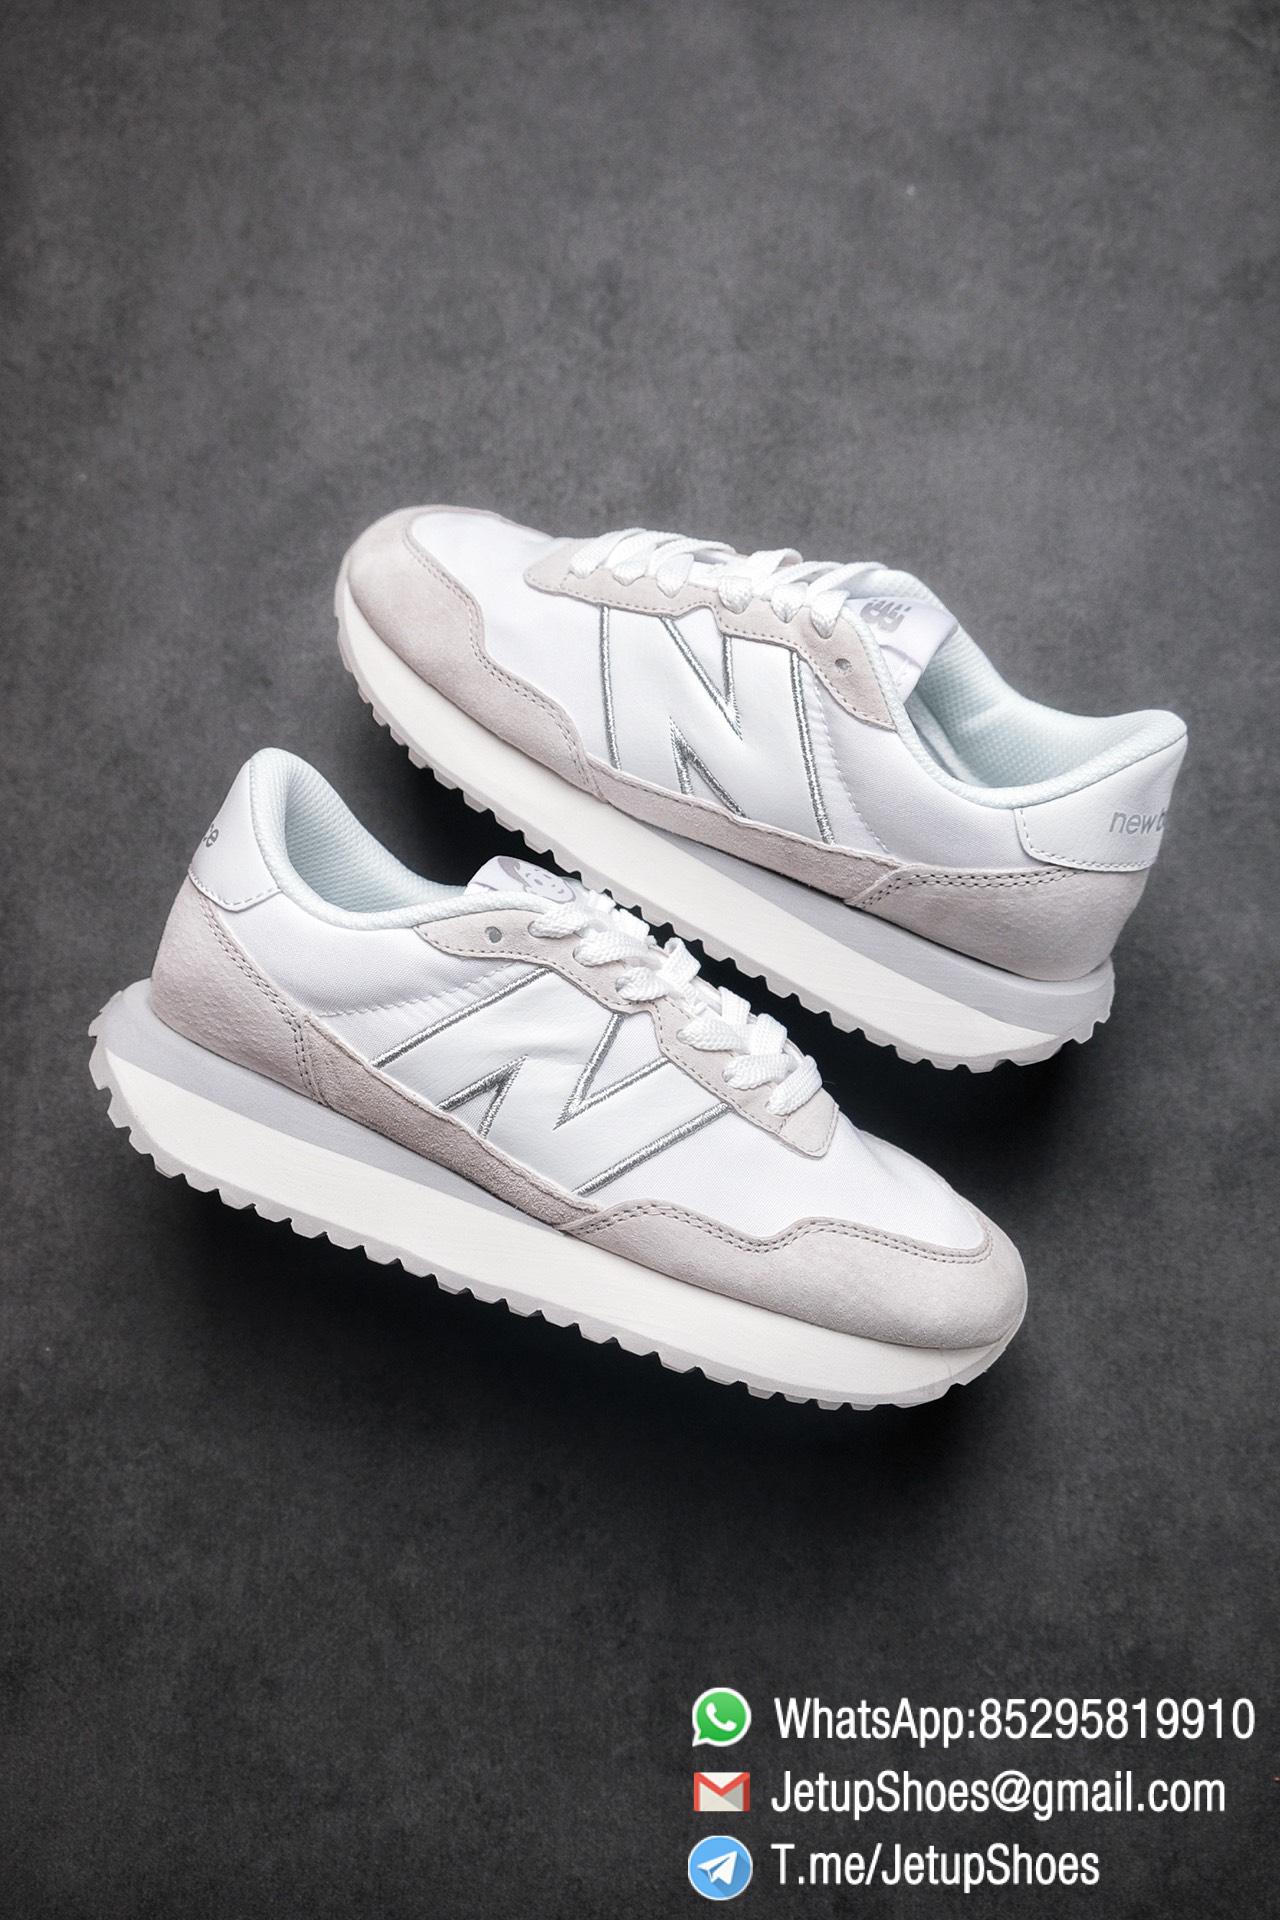 Best Replica 2021 New Balance 237 White Light Grey SKU MS237NW1 High Quality Running Sneakers 01